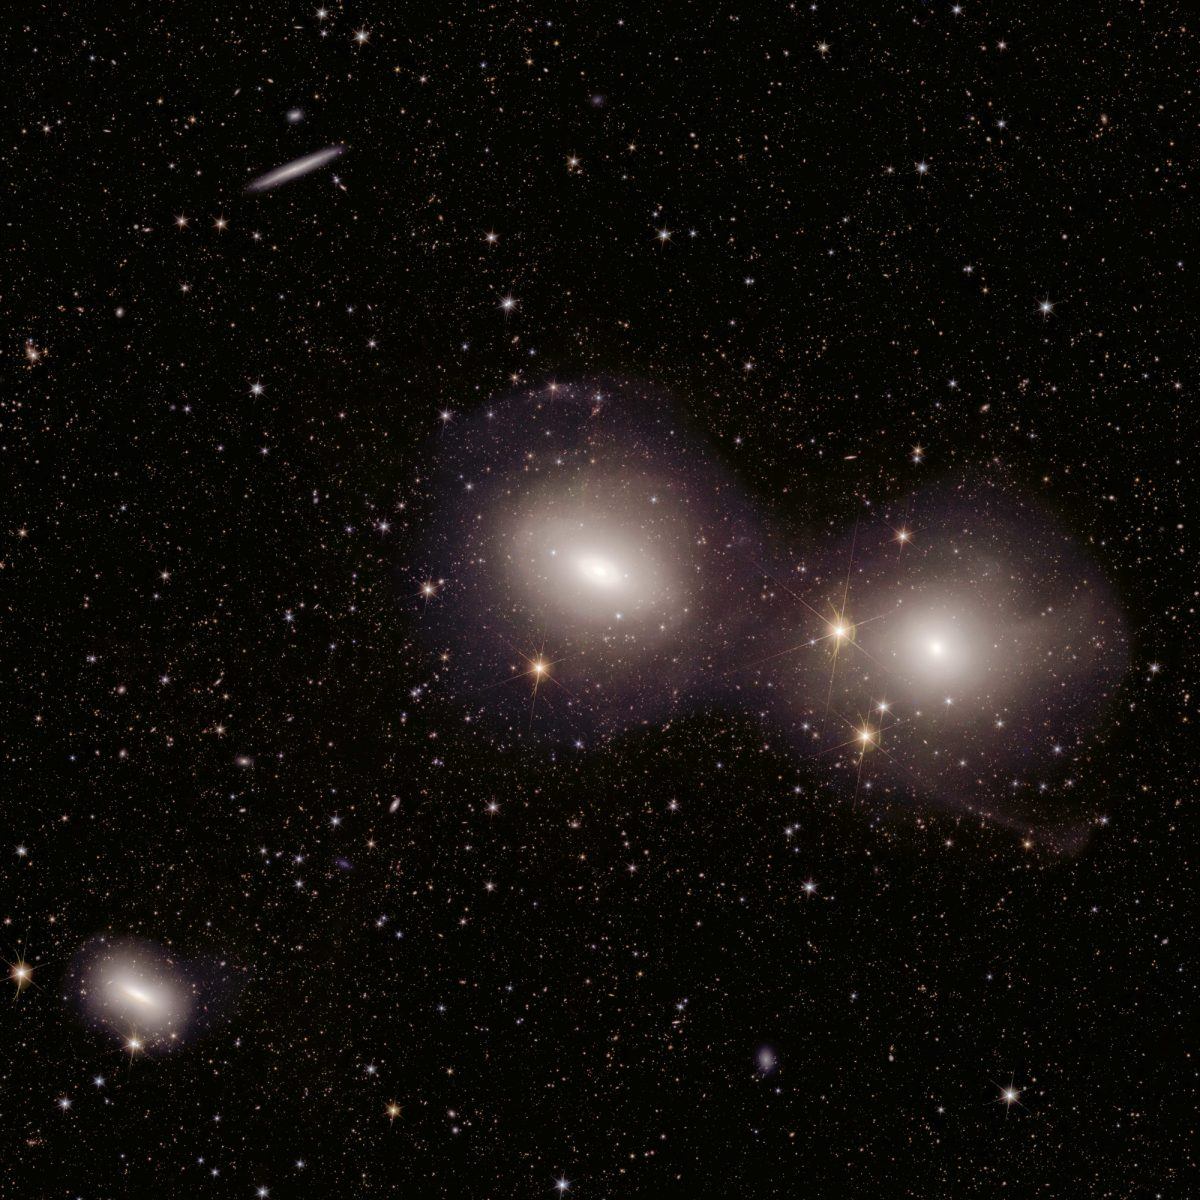 Image of multiple galaxies taken by Euclid.